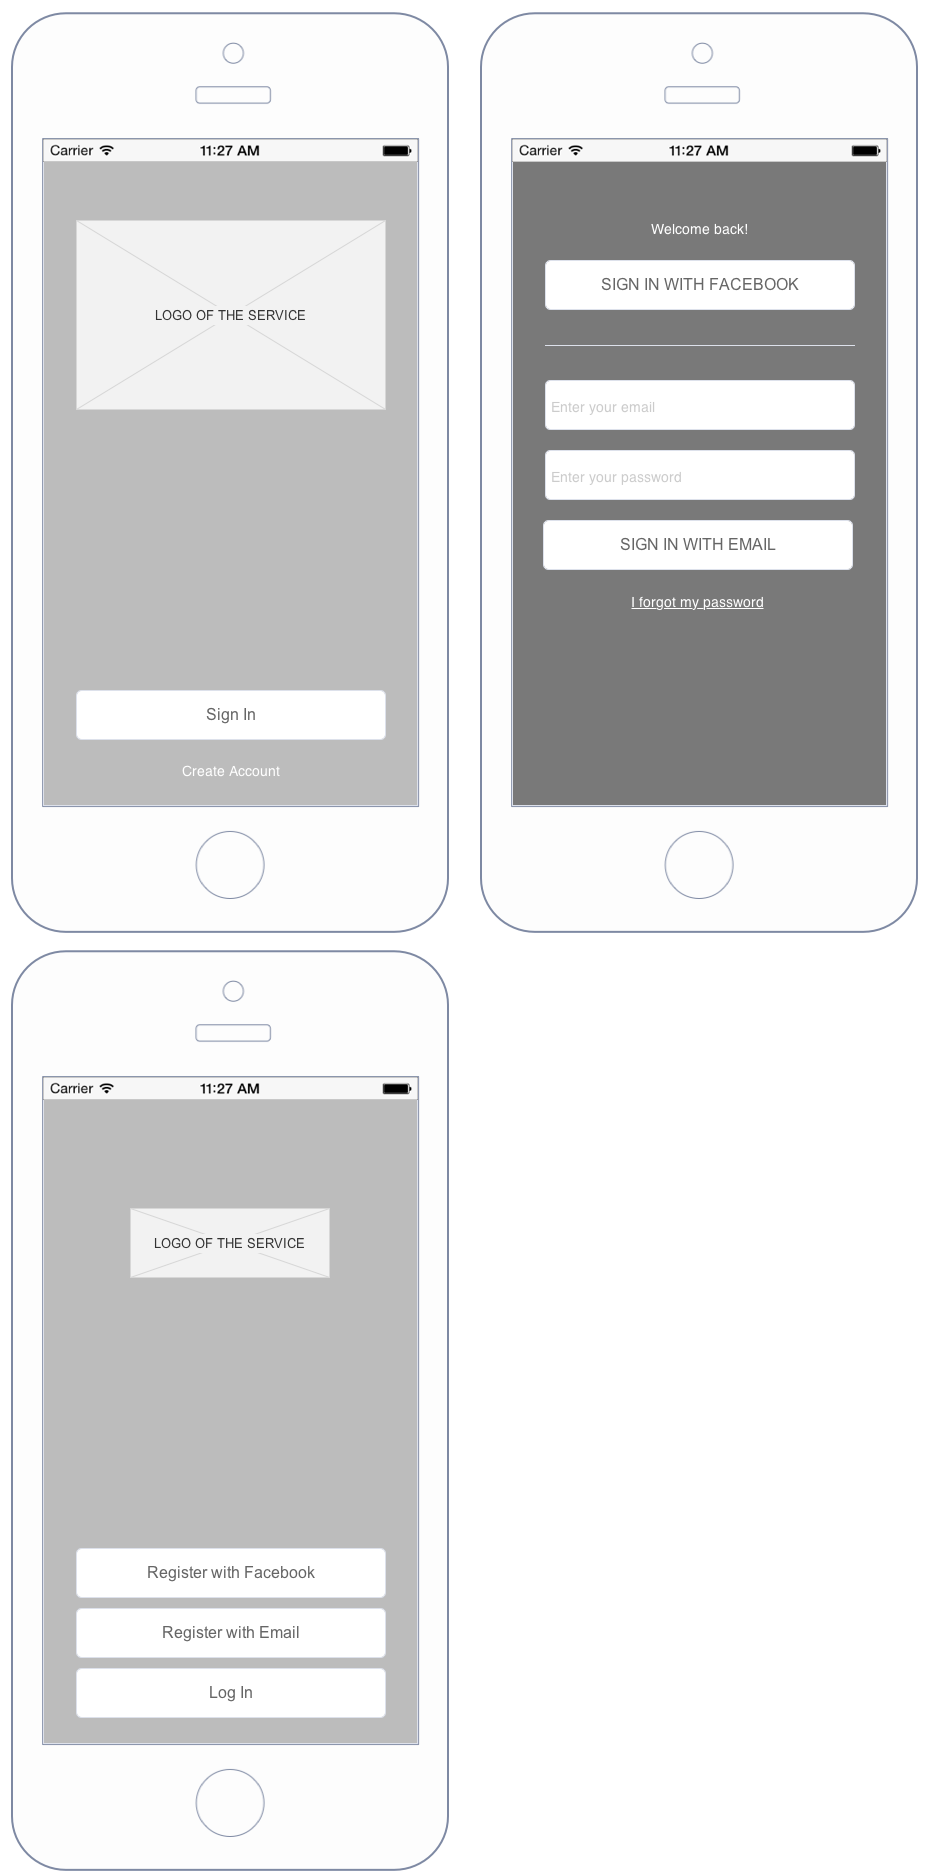 Totalwireframe 原型素材系列之 iPhone Apps Library [for Axure]插图14